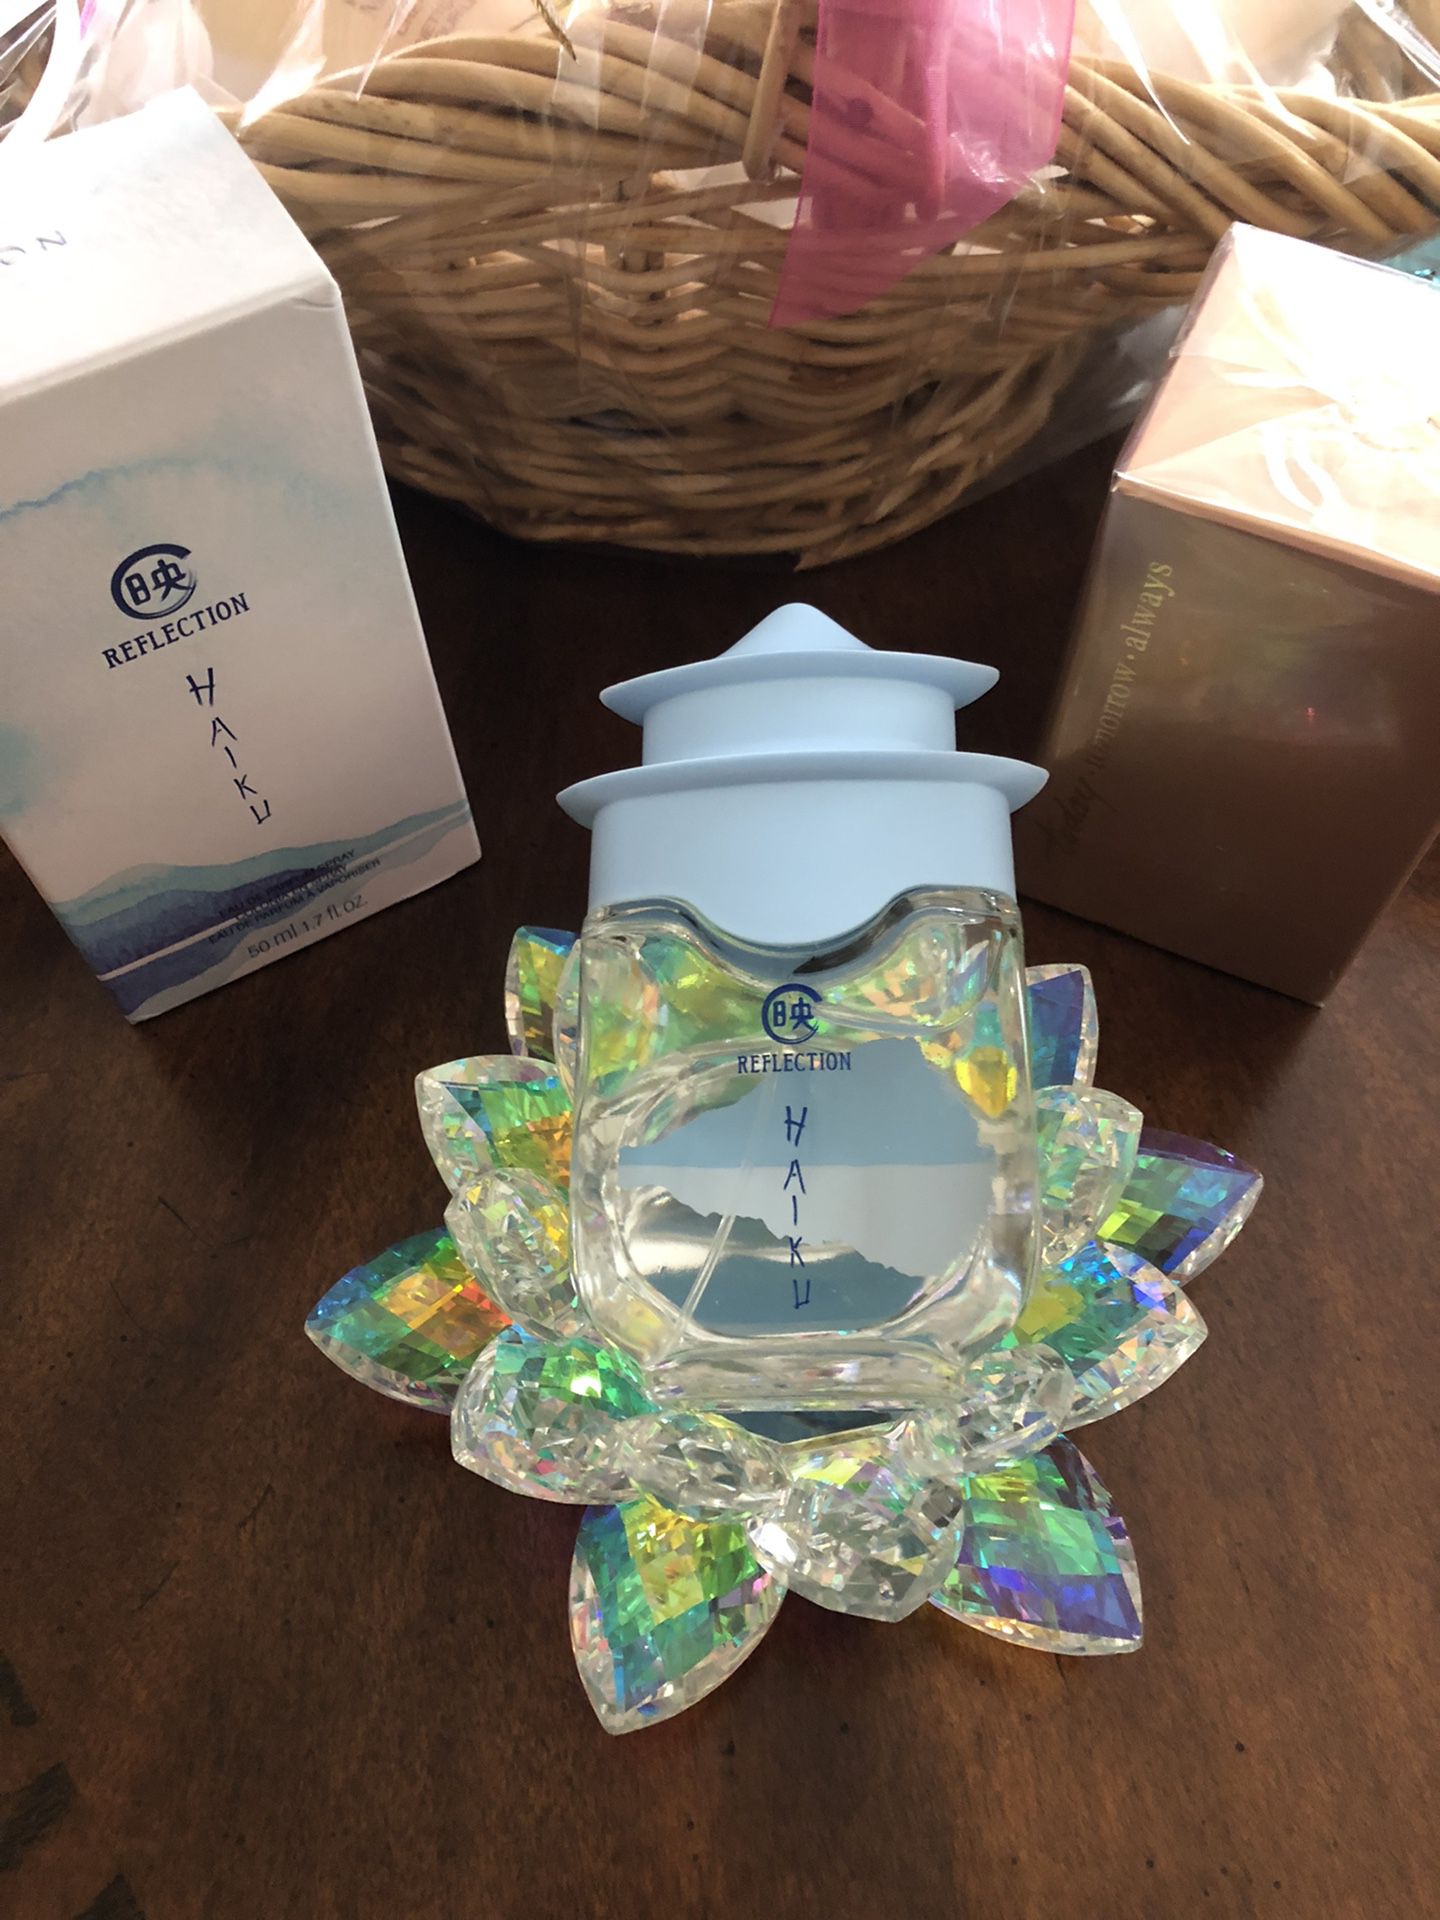 New Perfume with Free Gift Bag- Excellent gift idea